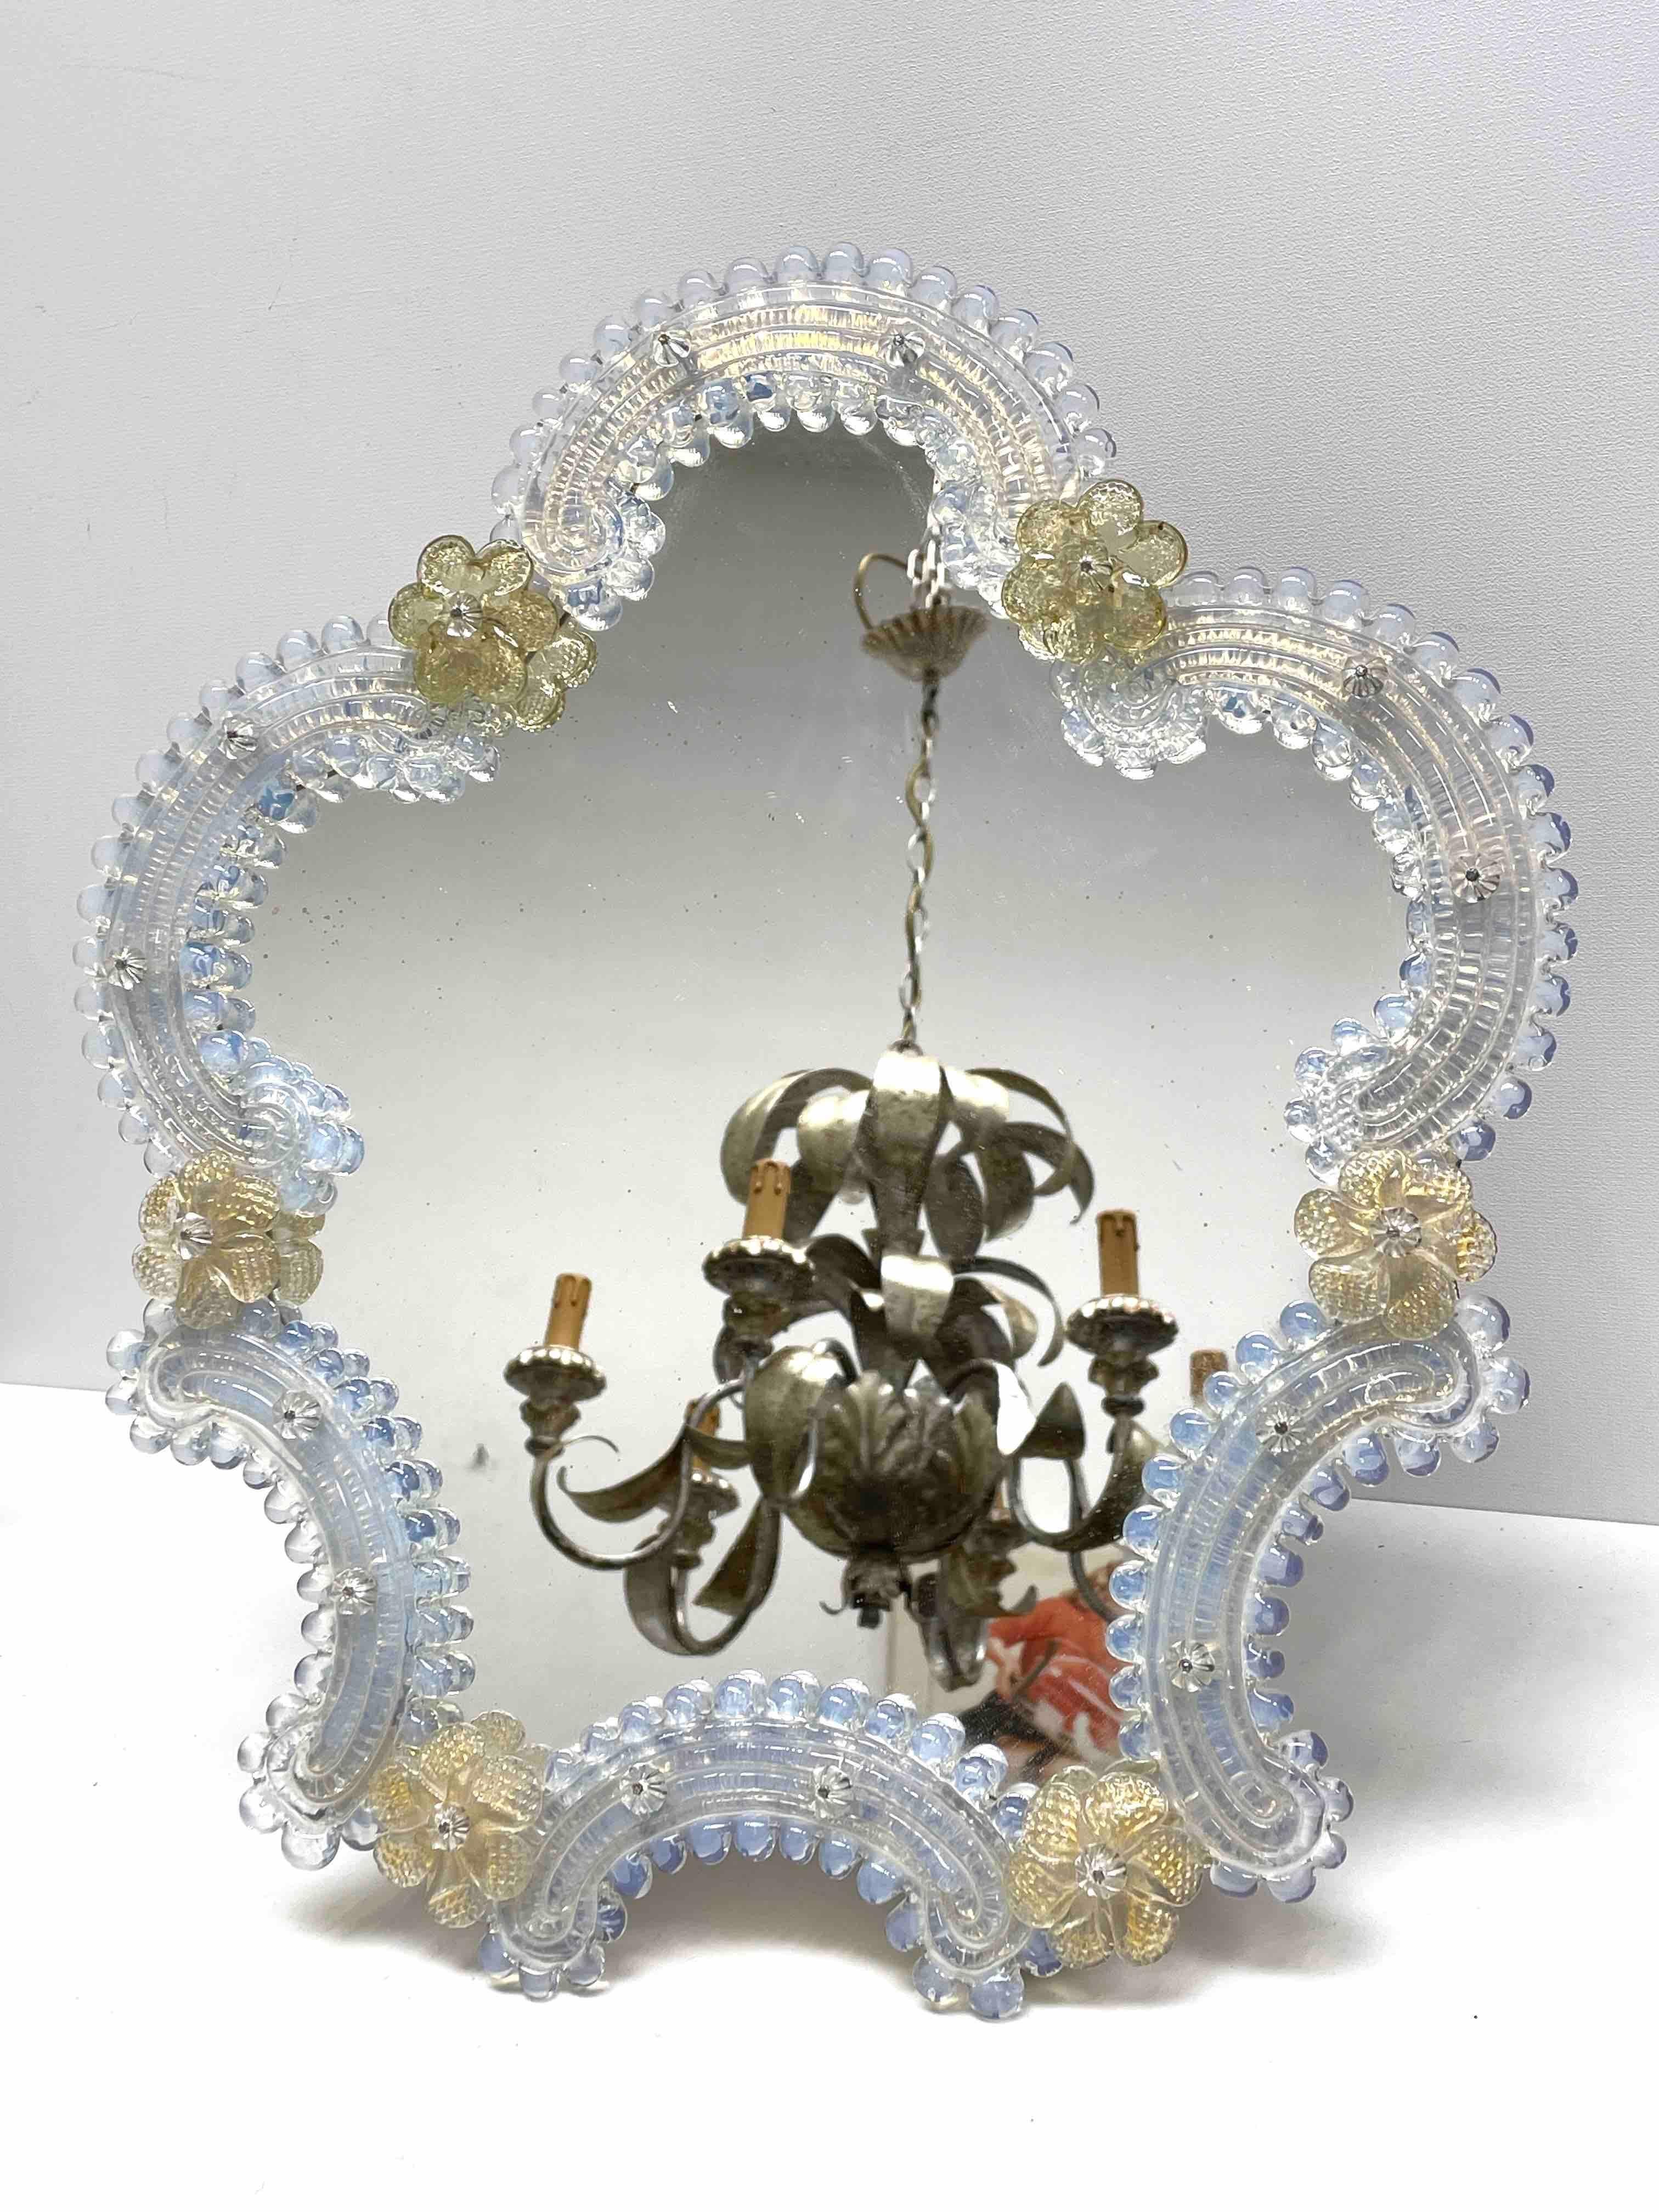 A gorgeous Murano glass vanity mirror surrounded with handmade glass flowers. With minor signs of wear as expected with age and use. A nice addition to any dressing room.